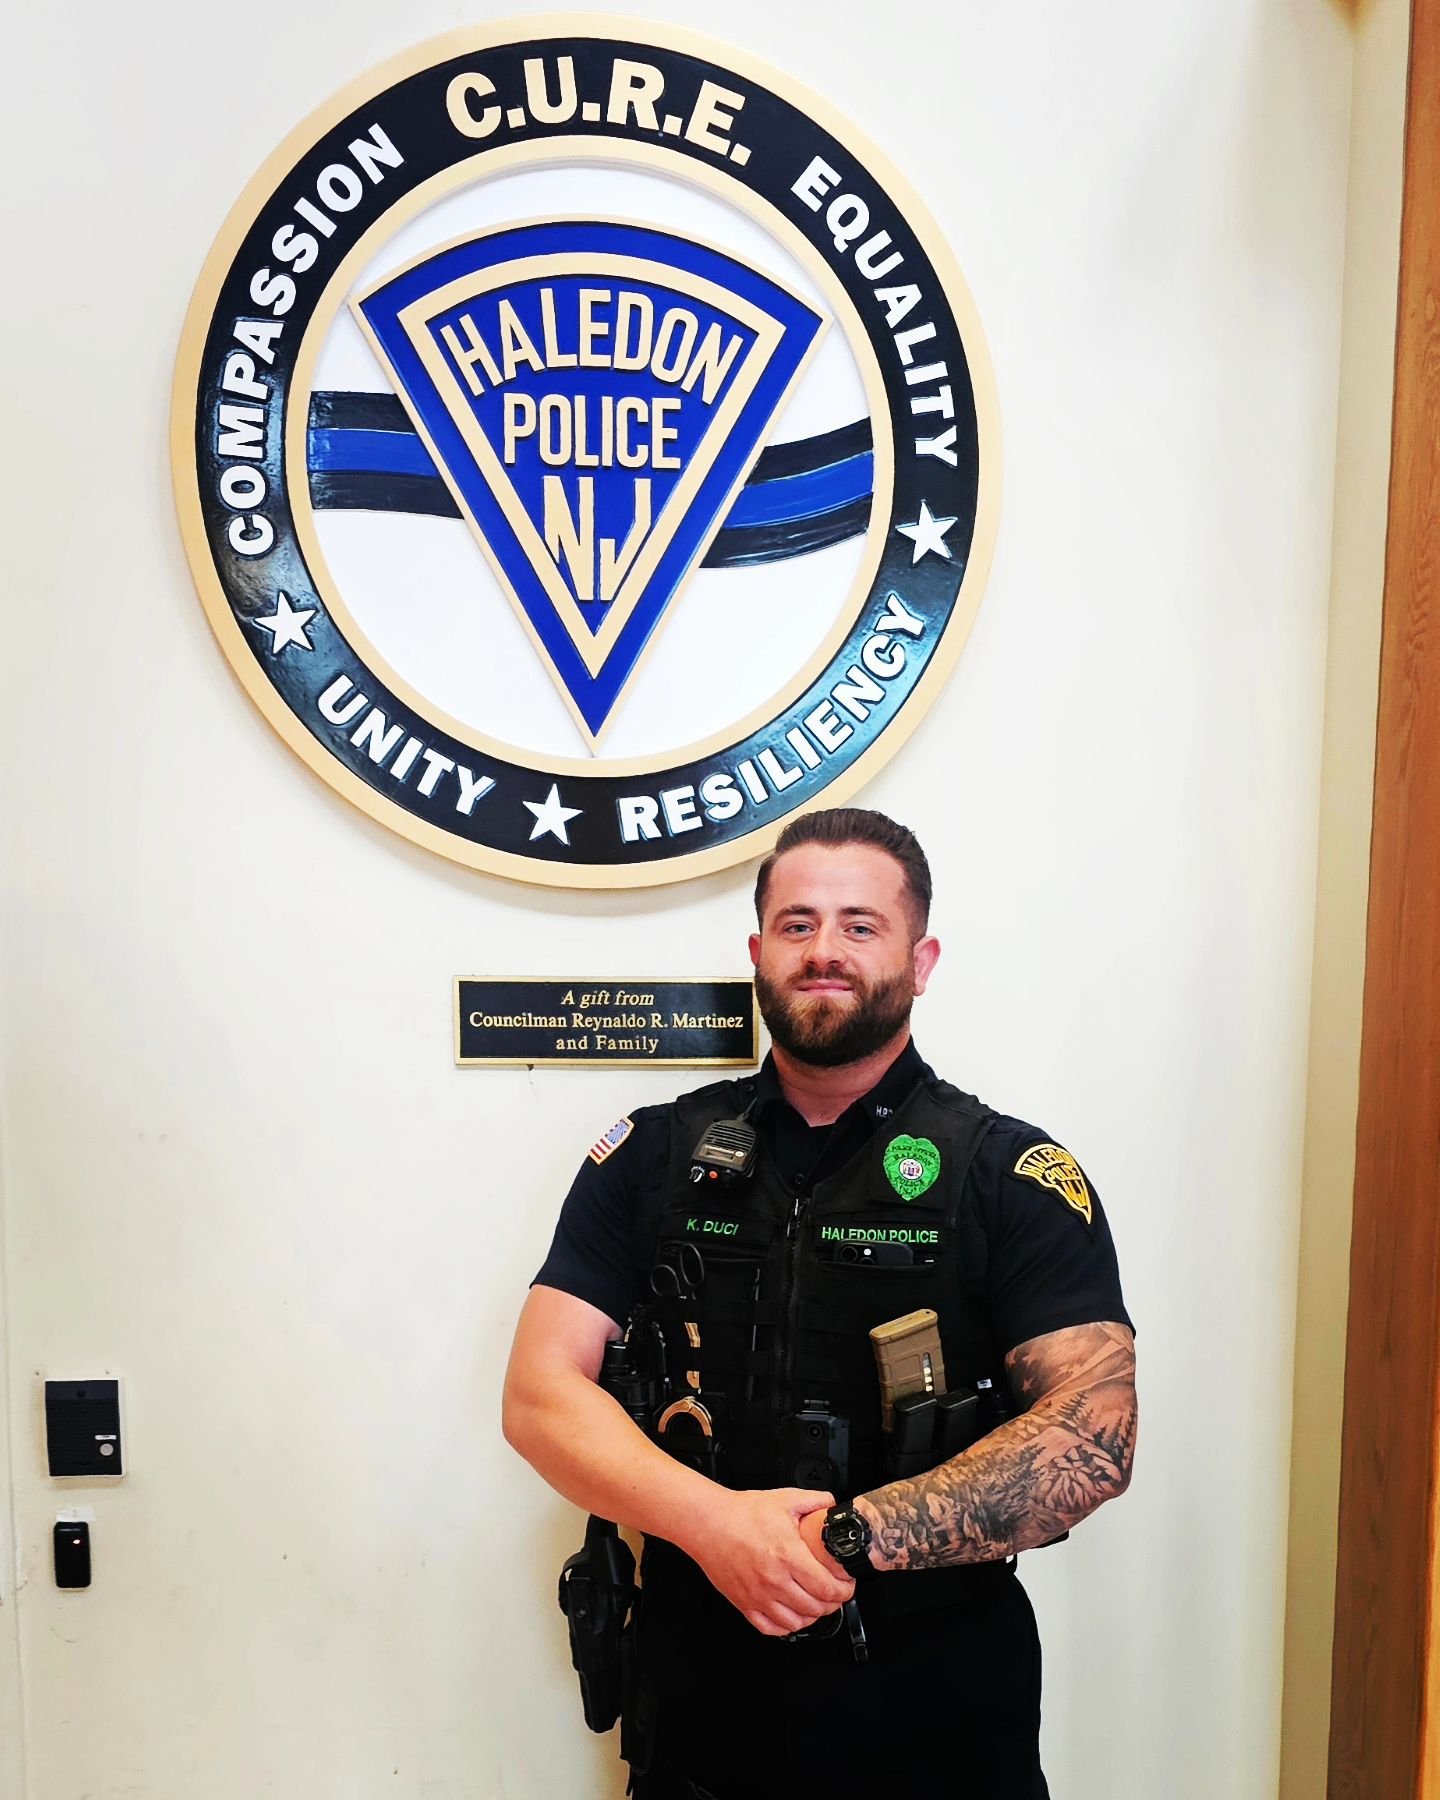 💚 May is Mental Health Awareness Month! 💚

Join us in honoring Mental Health Awareness Month as Officer Kris Duci and our dedicated officers proudly wear green name tags and embroidered badges in support of those impacted by mental health challenge